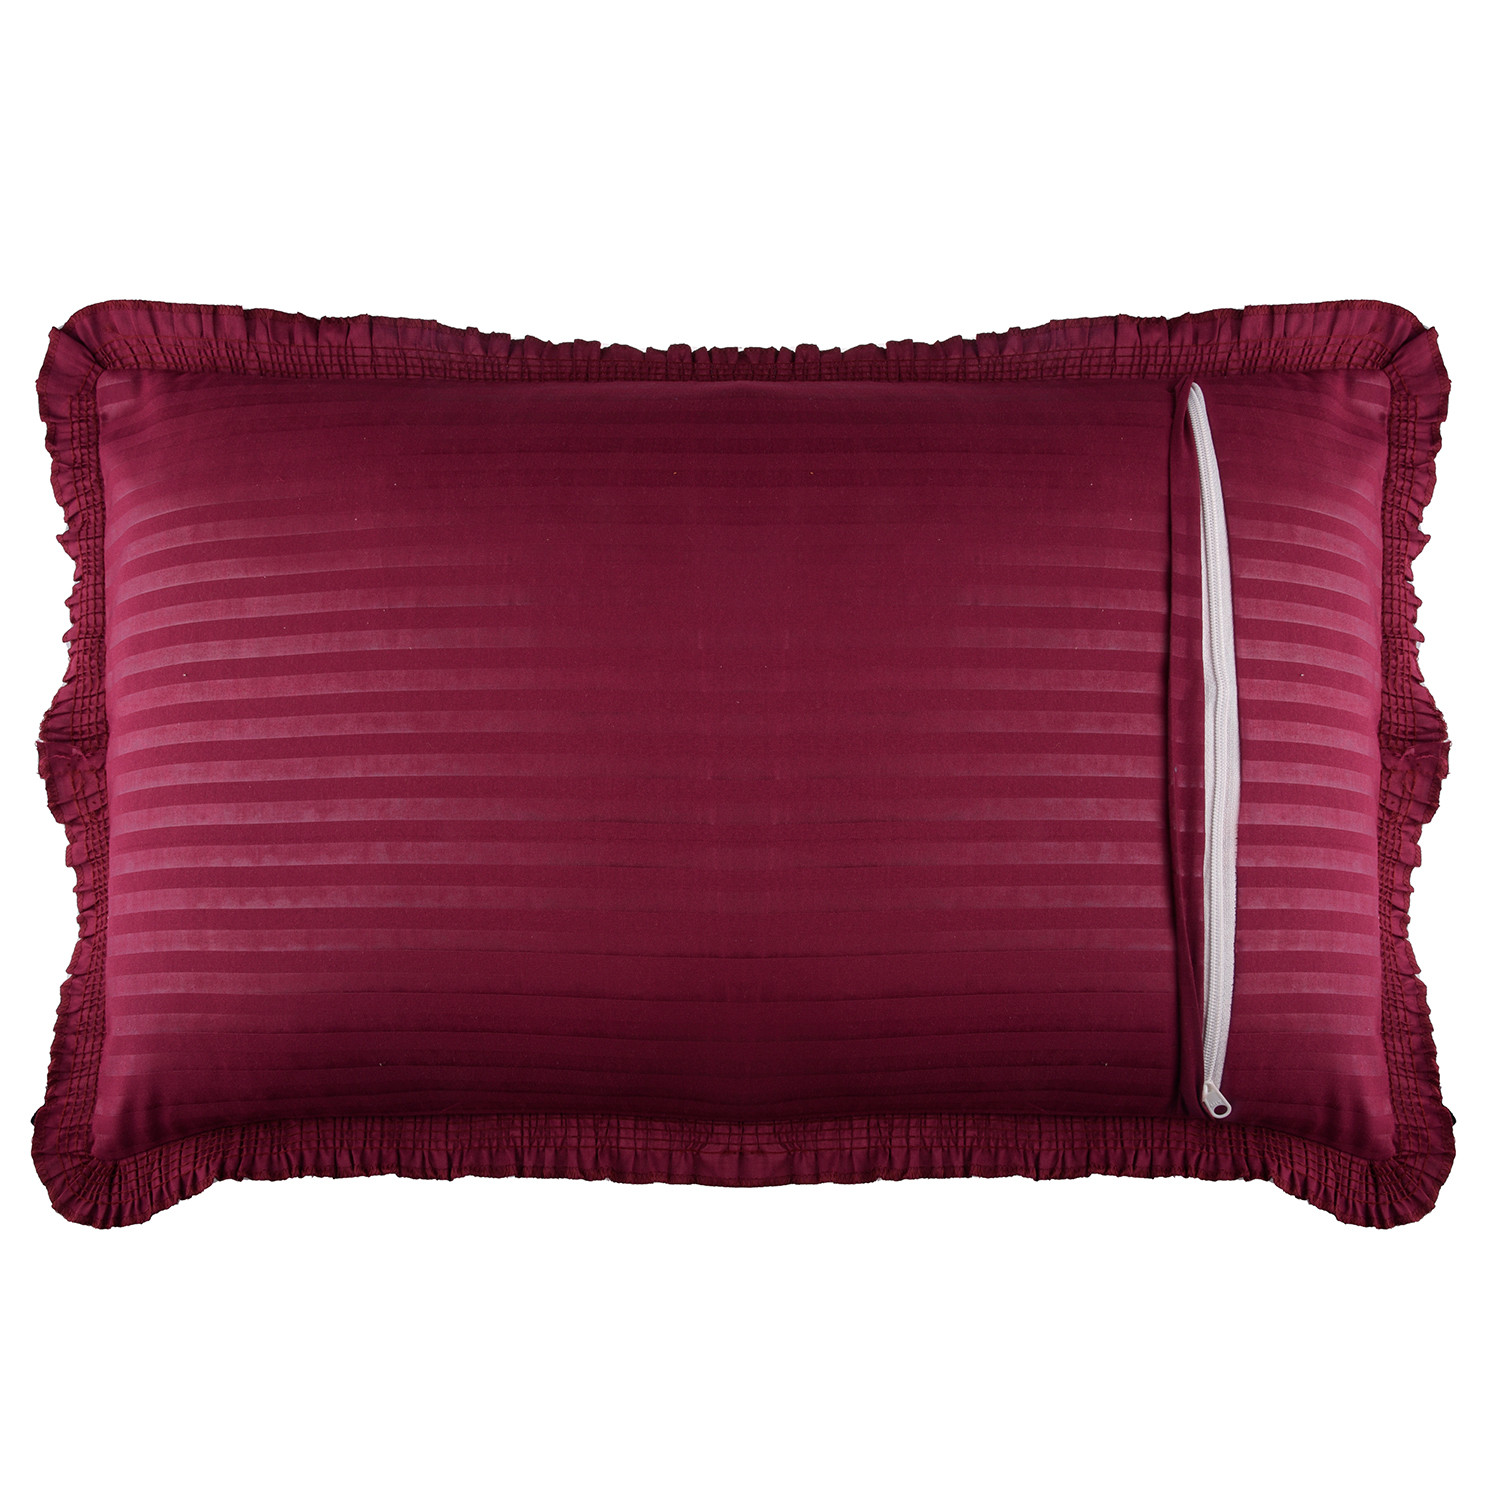 Kuber Industries Pillow Cover | Cotton Pillow Cover Set | Cushion Pillow Cover Set | Premium Pillow Cover Set for Bedroom | Lining Frill Pillow Cover Set |Maroon